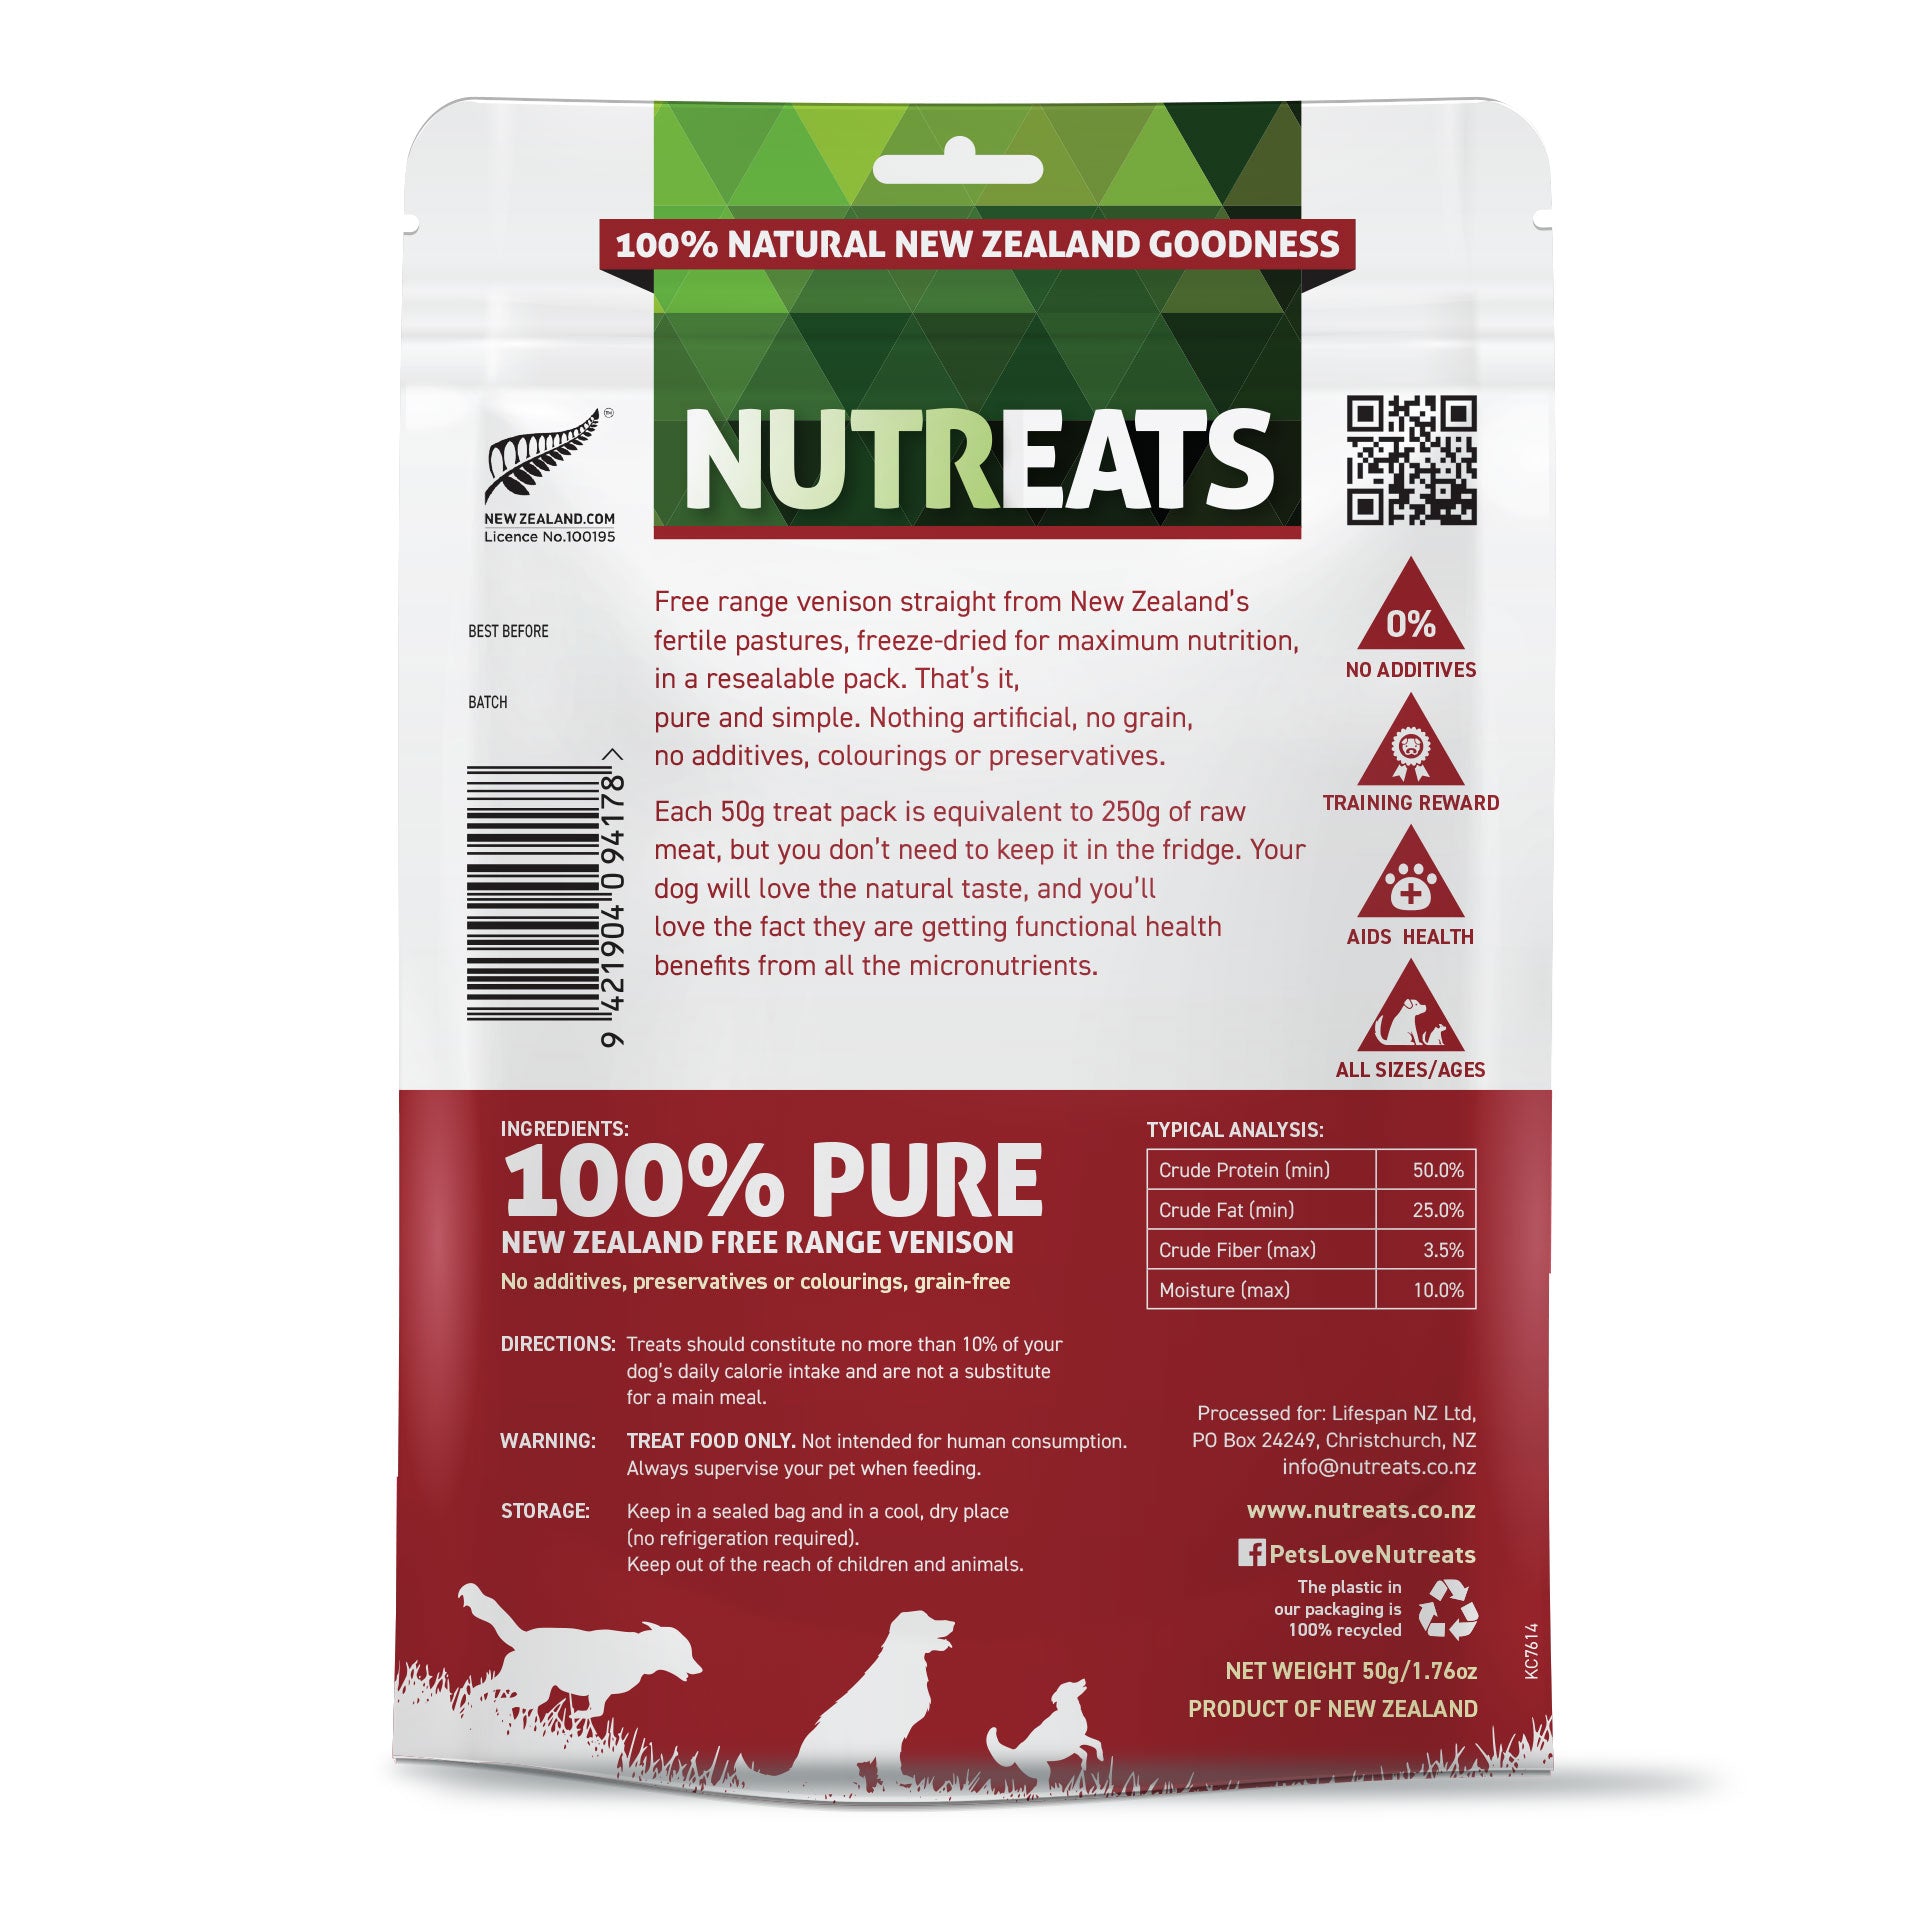 New Zealand Free Range Venison dog treats. Easy to digest and supporting naturally healthy digestion, rich in minerals and vitamins. This 100% natural treat made with premium free range New Zealand venison for your dog. Great as a training reward treat, aids health and suitable for all sizes of dog at all ages.